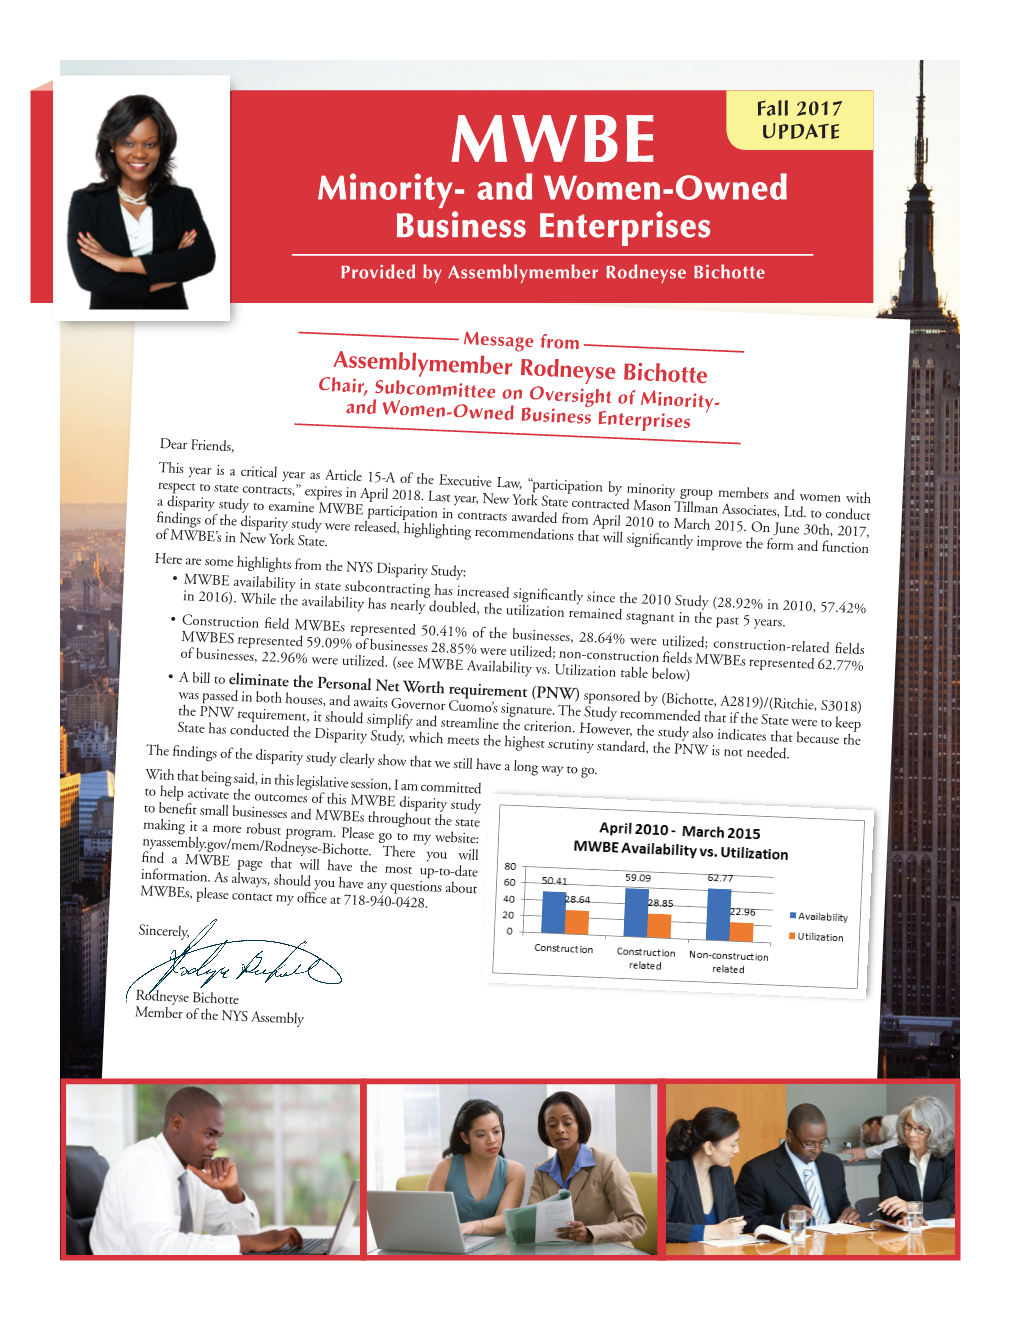 MWBE Minority-And Women-Owned Business Enterprises